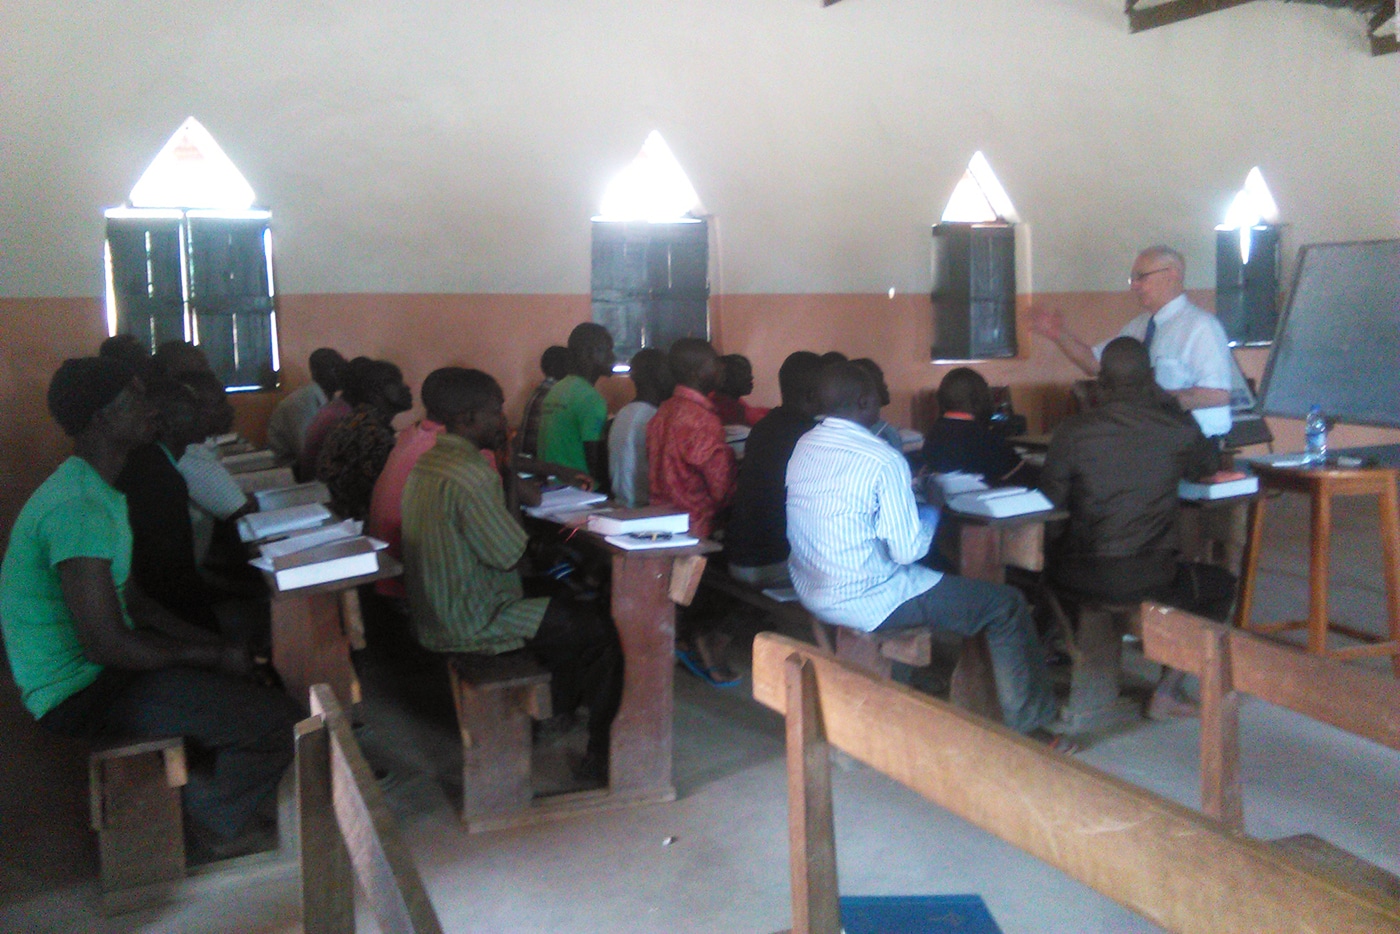 Students at the Sudan seminary attend their first day of class